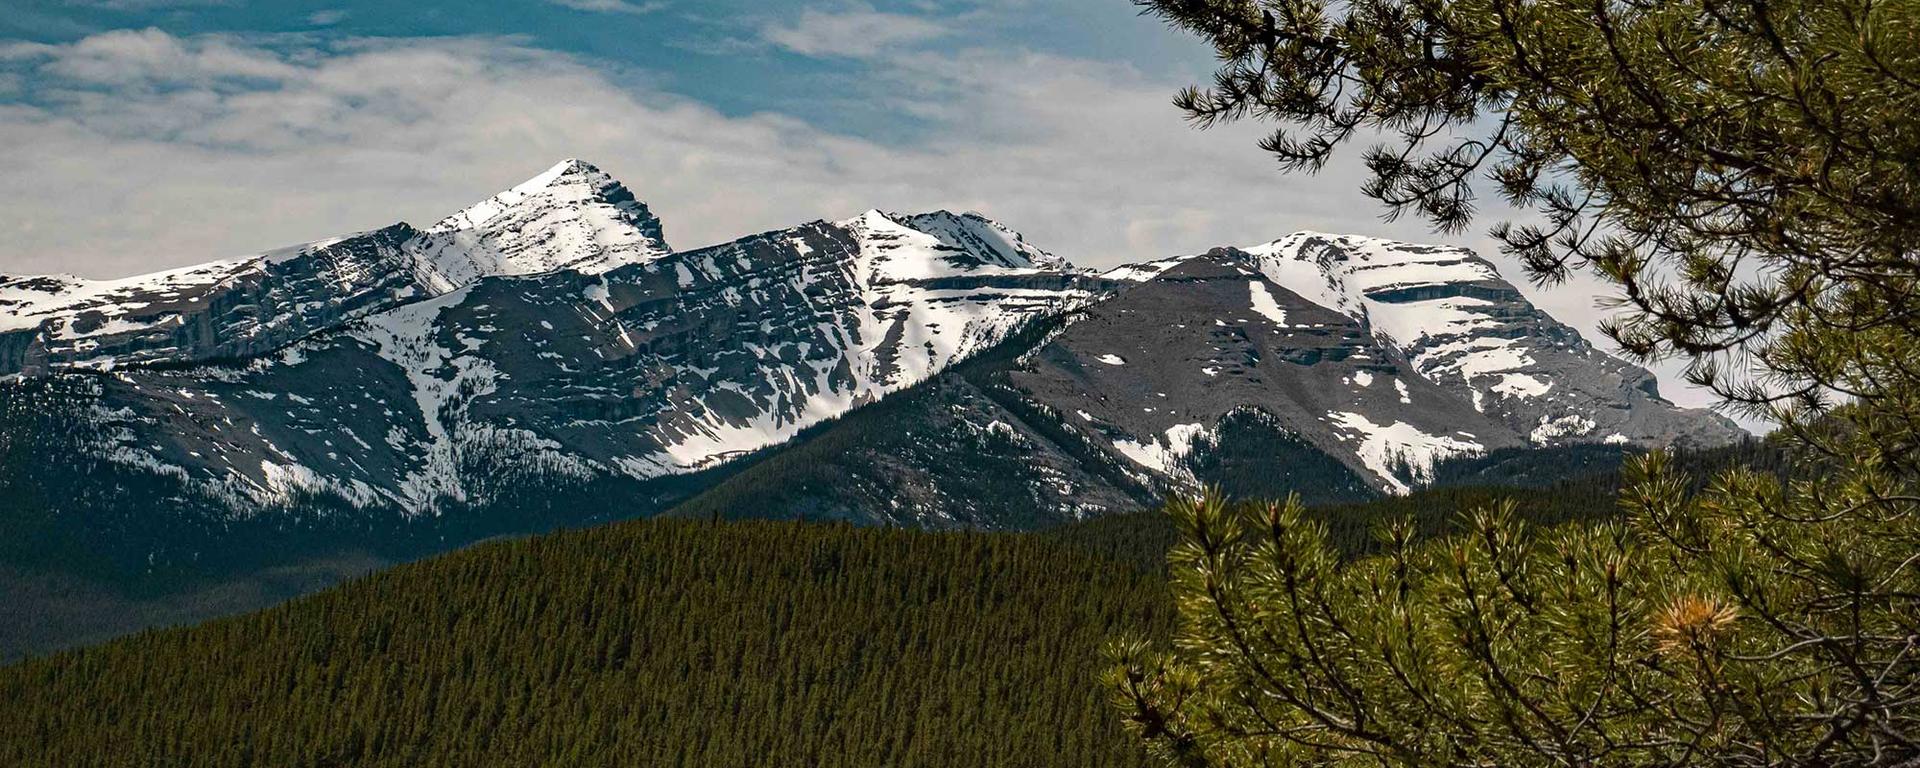 Stock photo of Kananaskis Mountains on a partly cloudy day